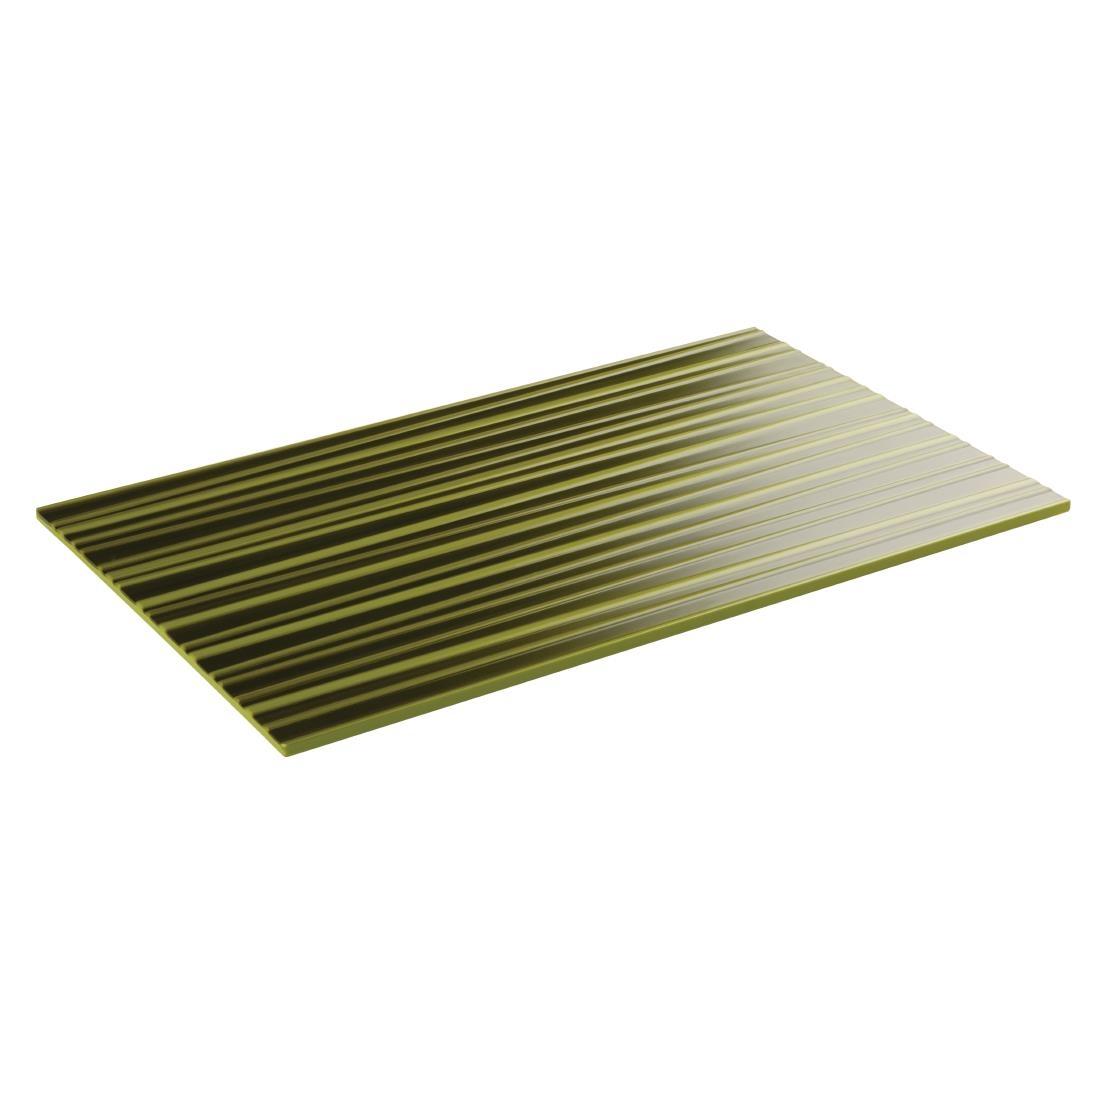 APS Asia+ Bamboo Leaf Tray GN 1/4 - Each - DT761 - 1